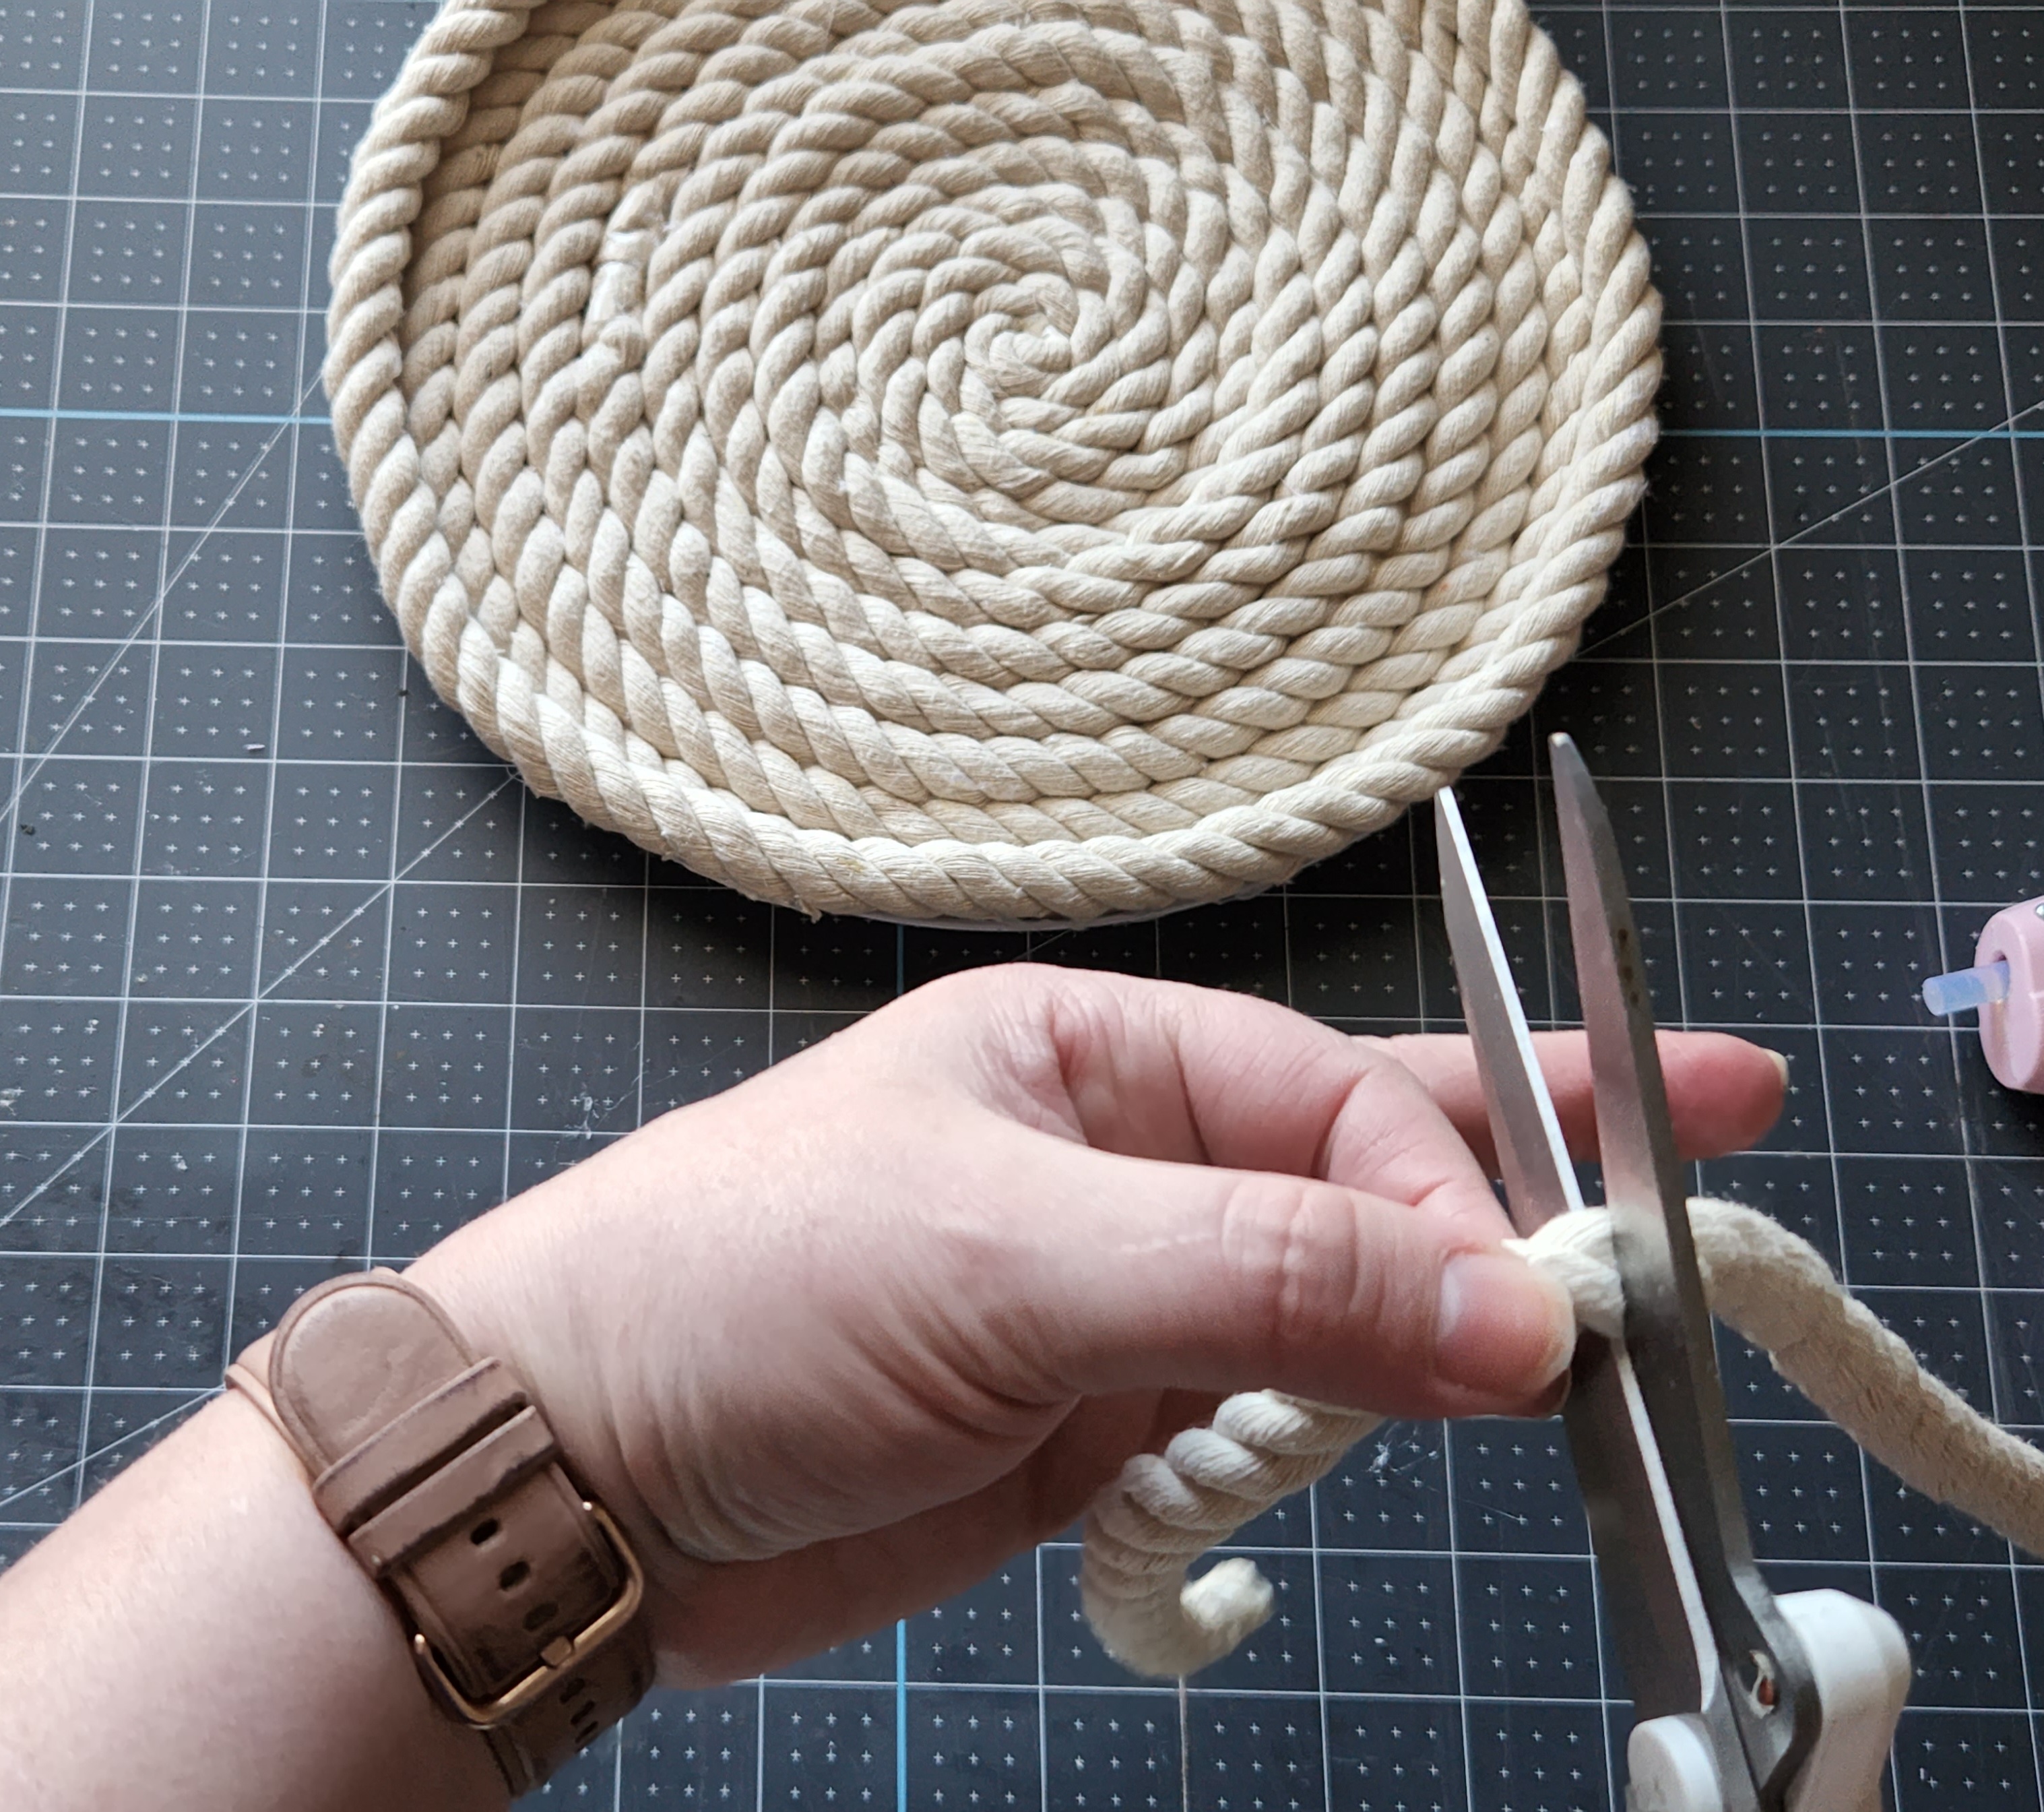 Cutting rope "handles" for the tray.